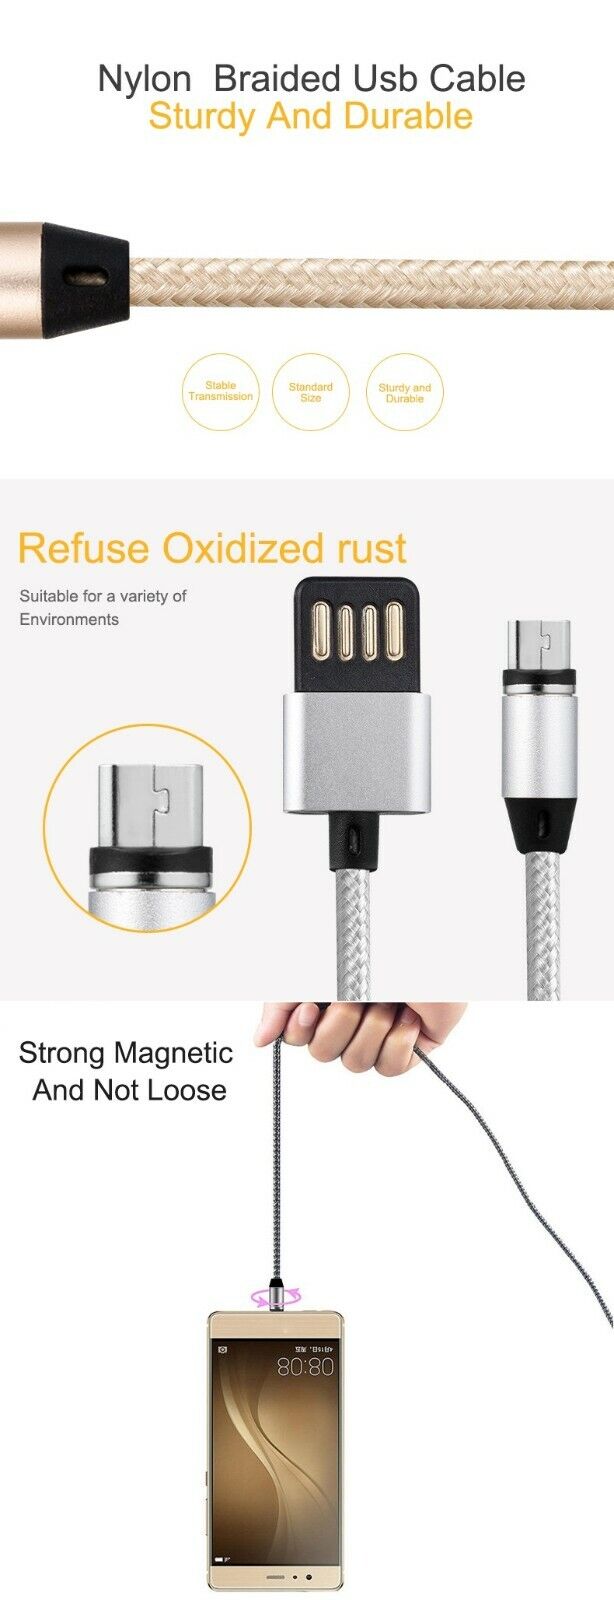 UK 3 in 1 LED Magnetic Fast Charging USB Cable - Type-USB C, Micro USB, iPhone